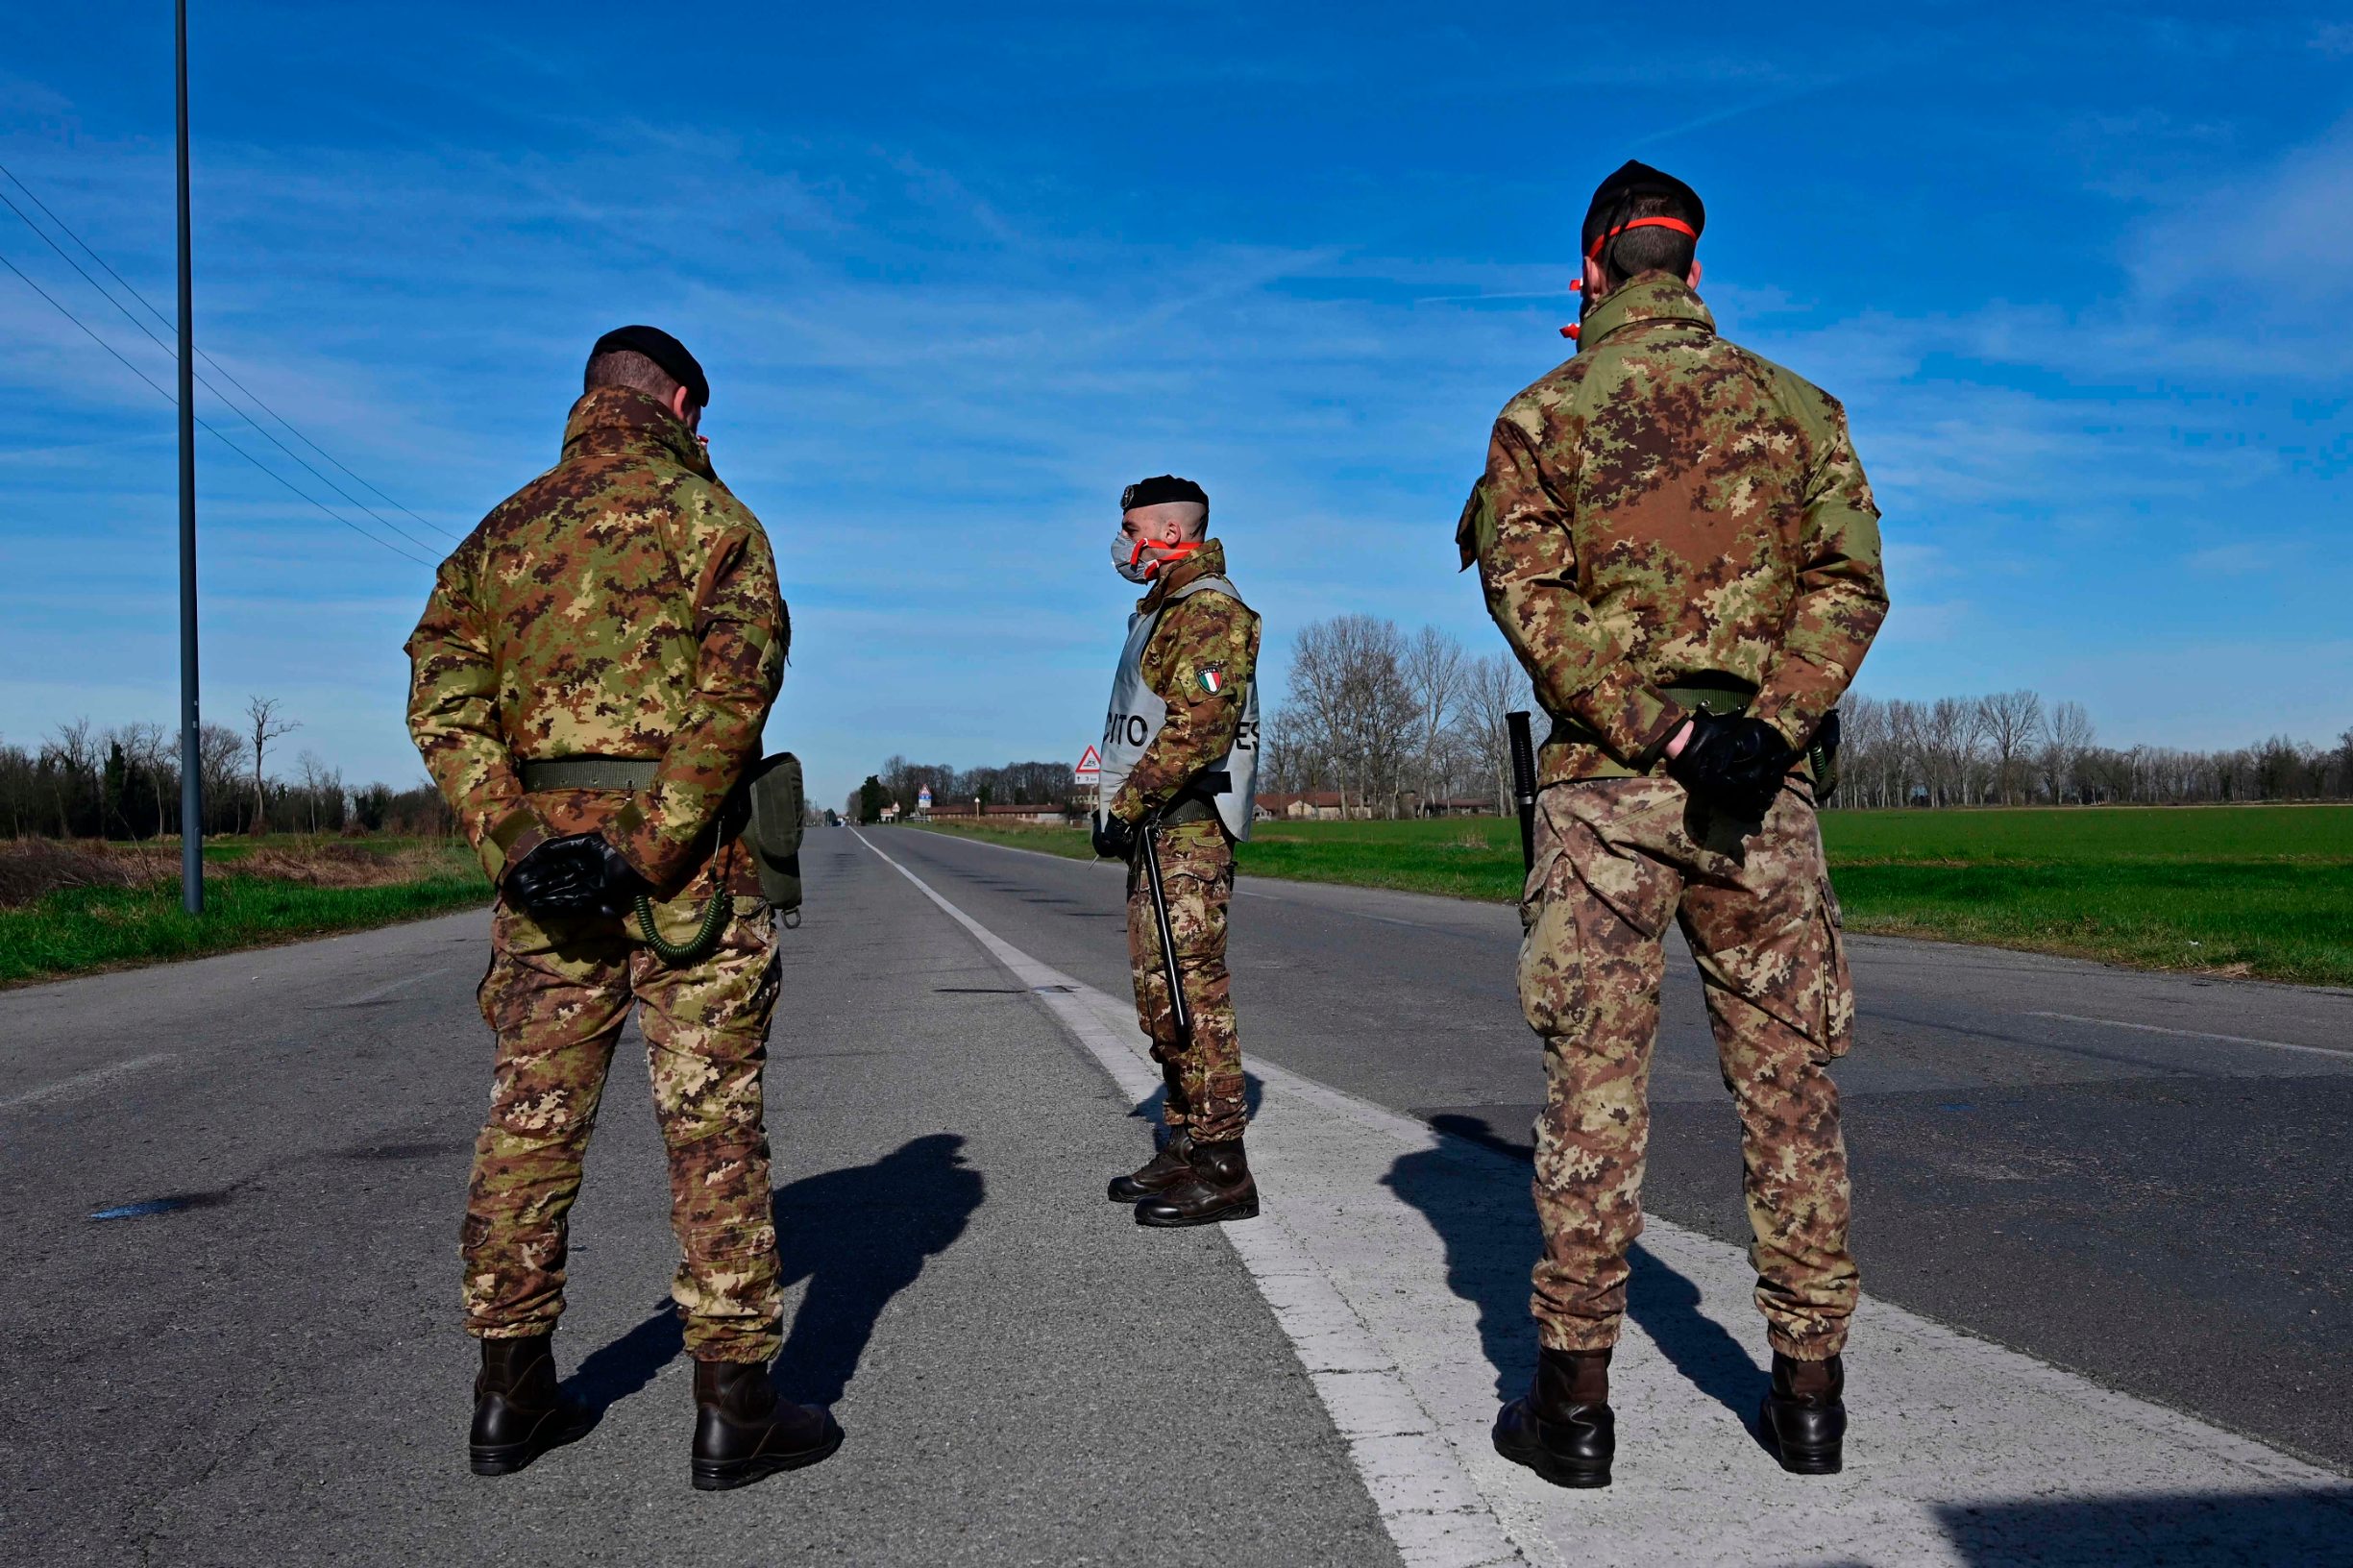 Italian Army soldiers wearing protective masks check transit to and from the cordoned areas in a check-point few kilometers from the small town of Castiglione d'Adda, southeast of Milan, on February 27, 2020 amid fears over the spread of the novel Coronavirus. - The number of COVID-19 infections in Italy, the hardest hit country in Europe, hits the 400 mark late on February 26, with 12 deaths. (Photo by Miguel MEDINA / AFP)